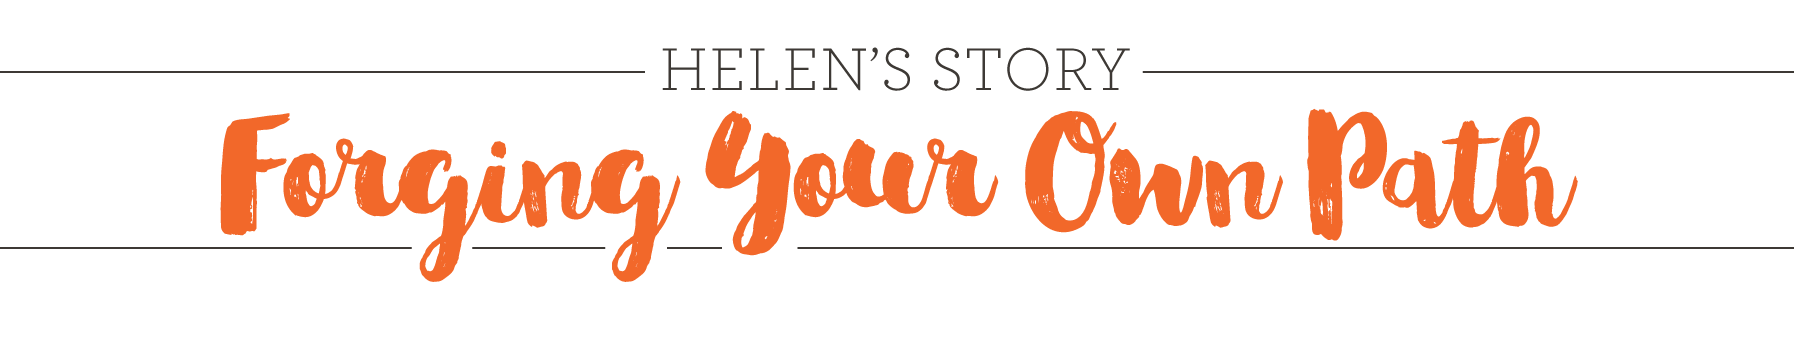 Helen's Story Forging your own Path